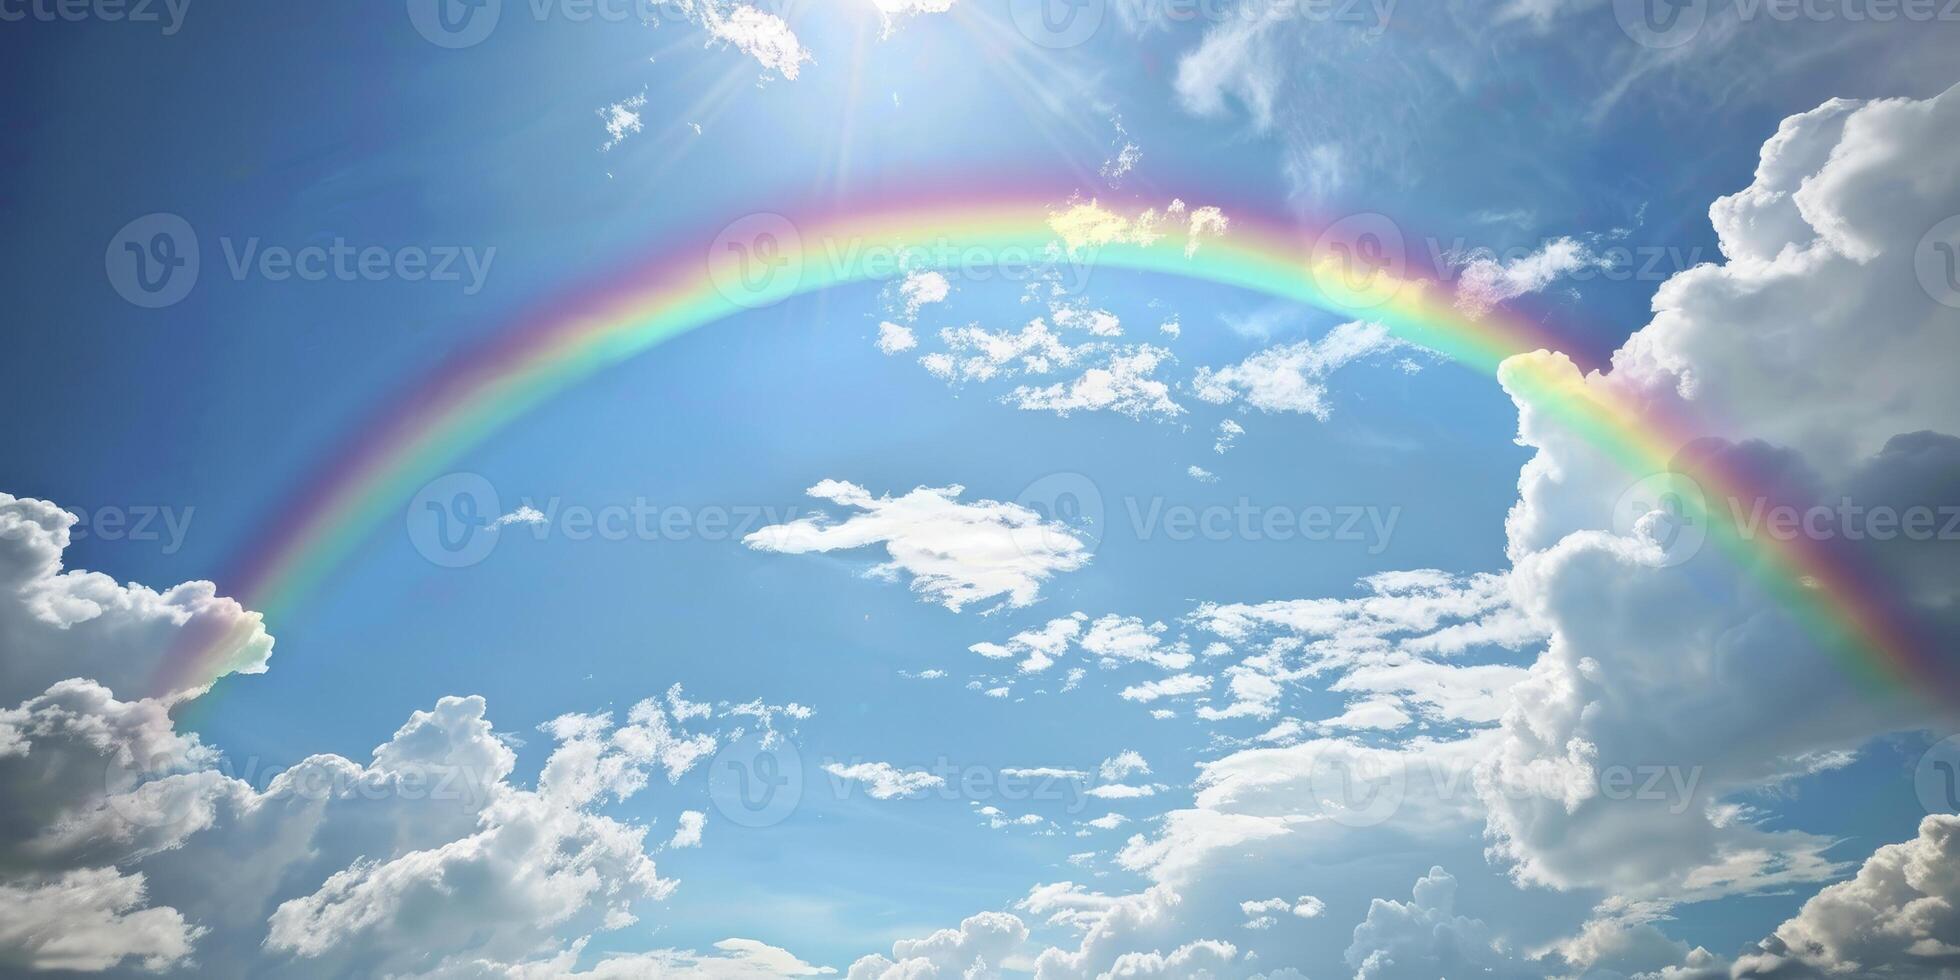 A rainbow arching across the sky, symbolizing hope and joy on Easter day. Blue skies with white clouds in the background. photo